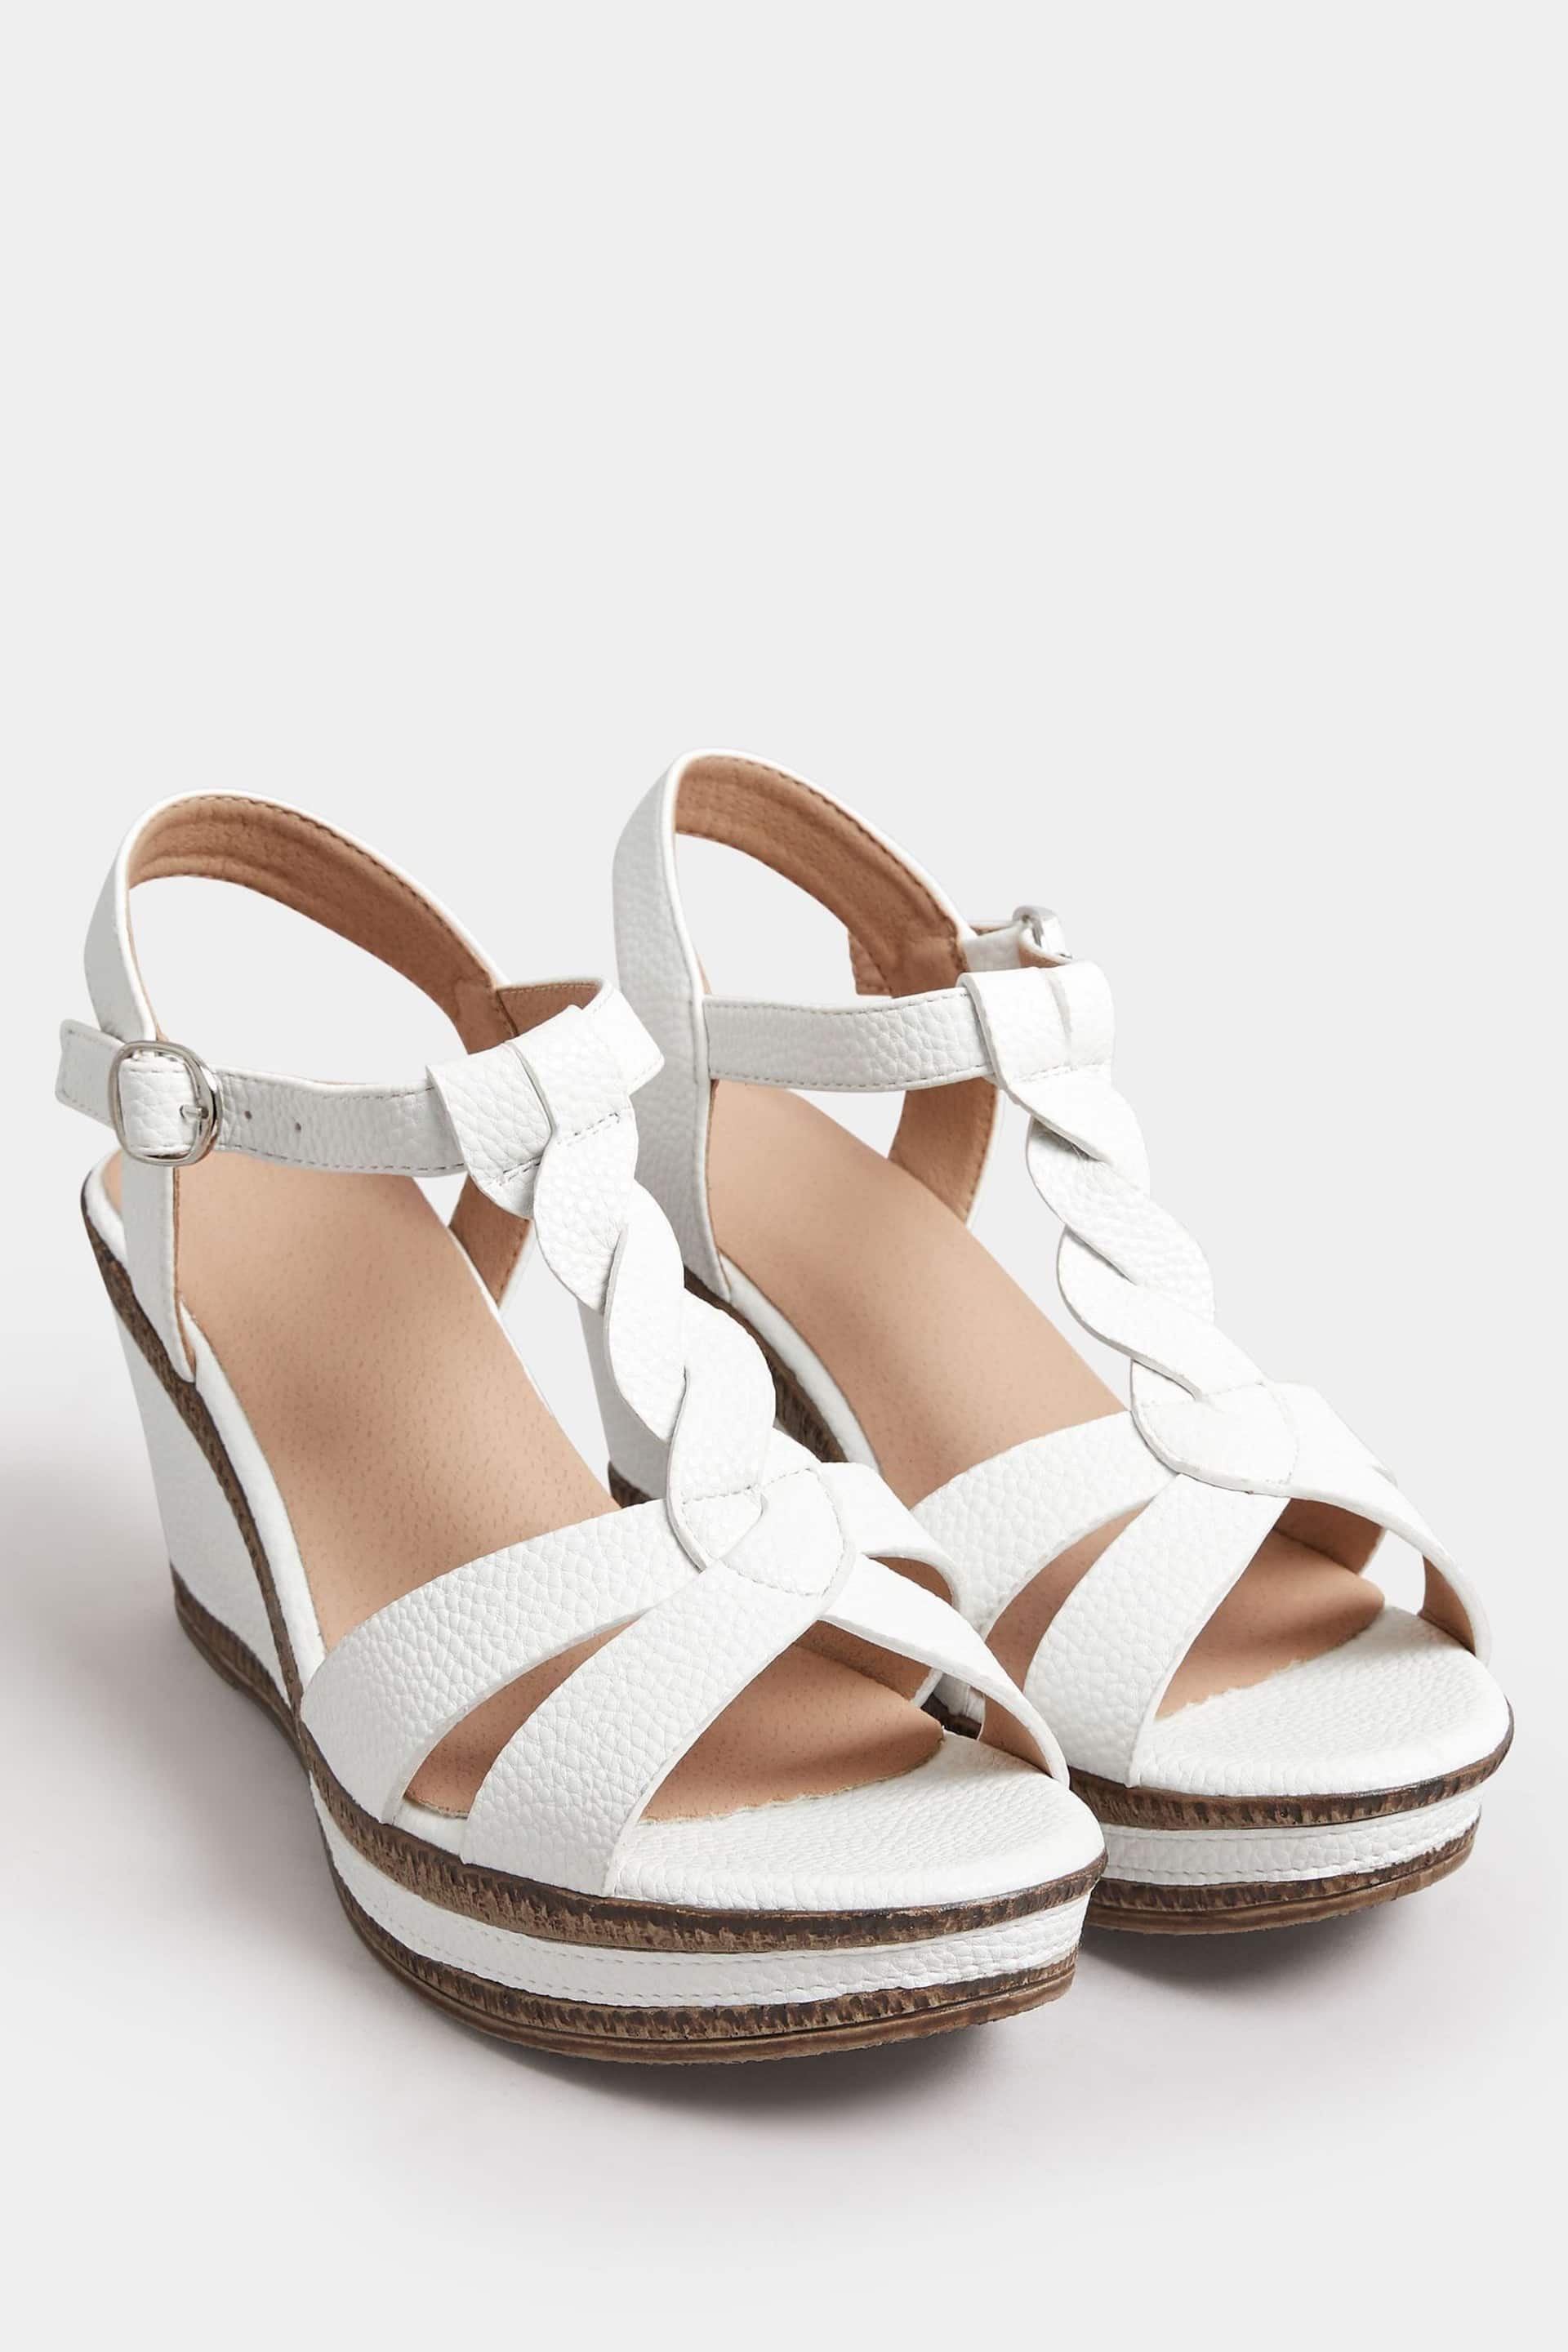 Yours Curve White Cross Strap Wedge Heels In Extra Wide EEE Fit - Image 1 of 5